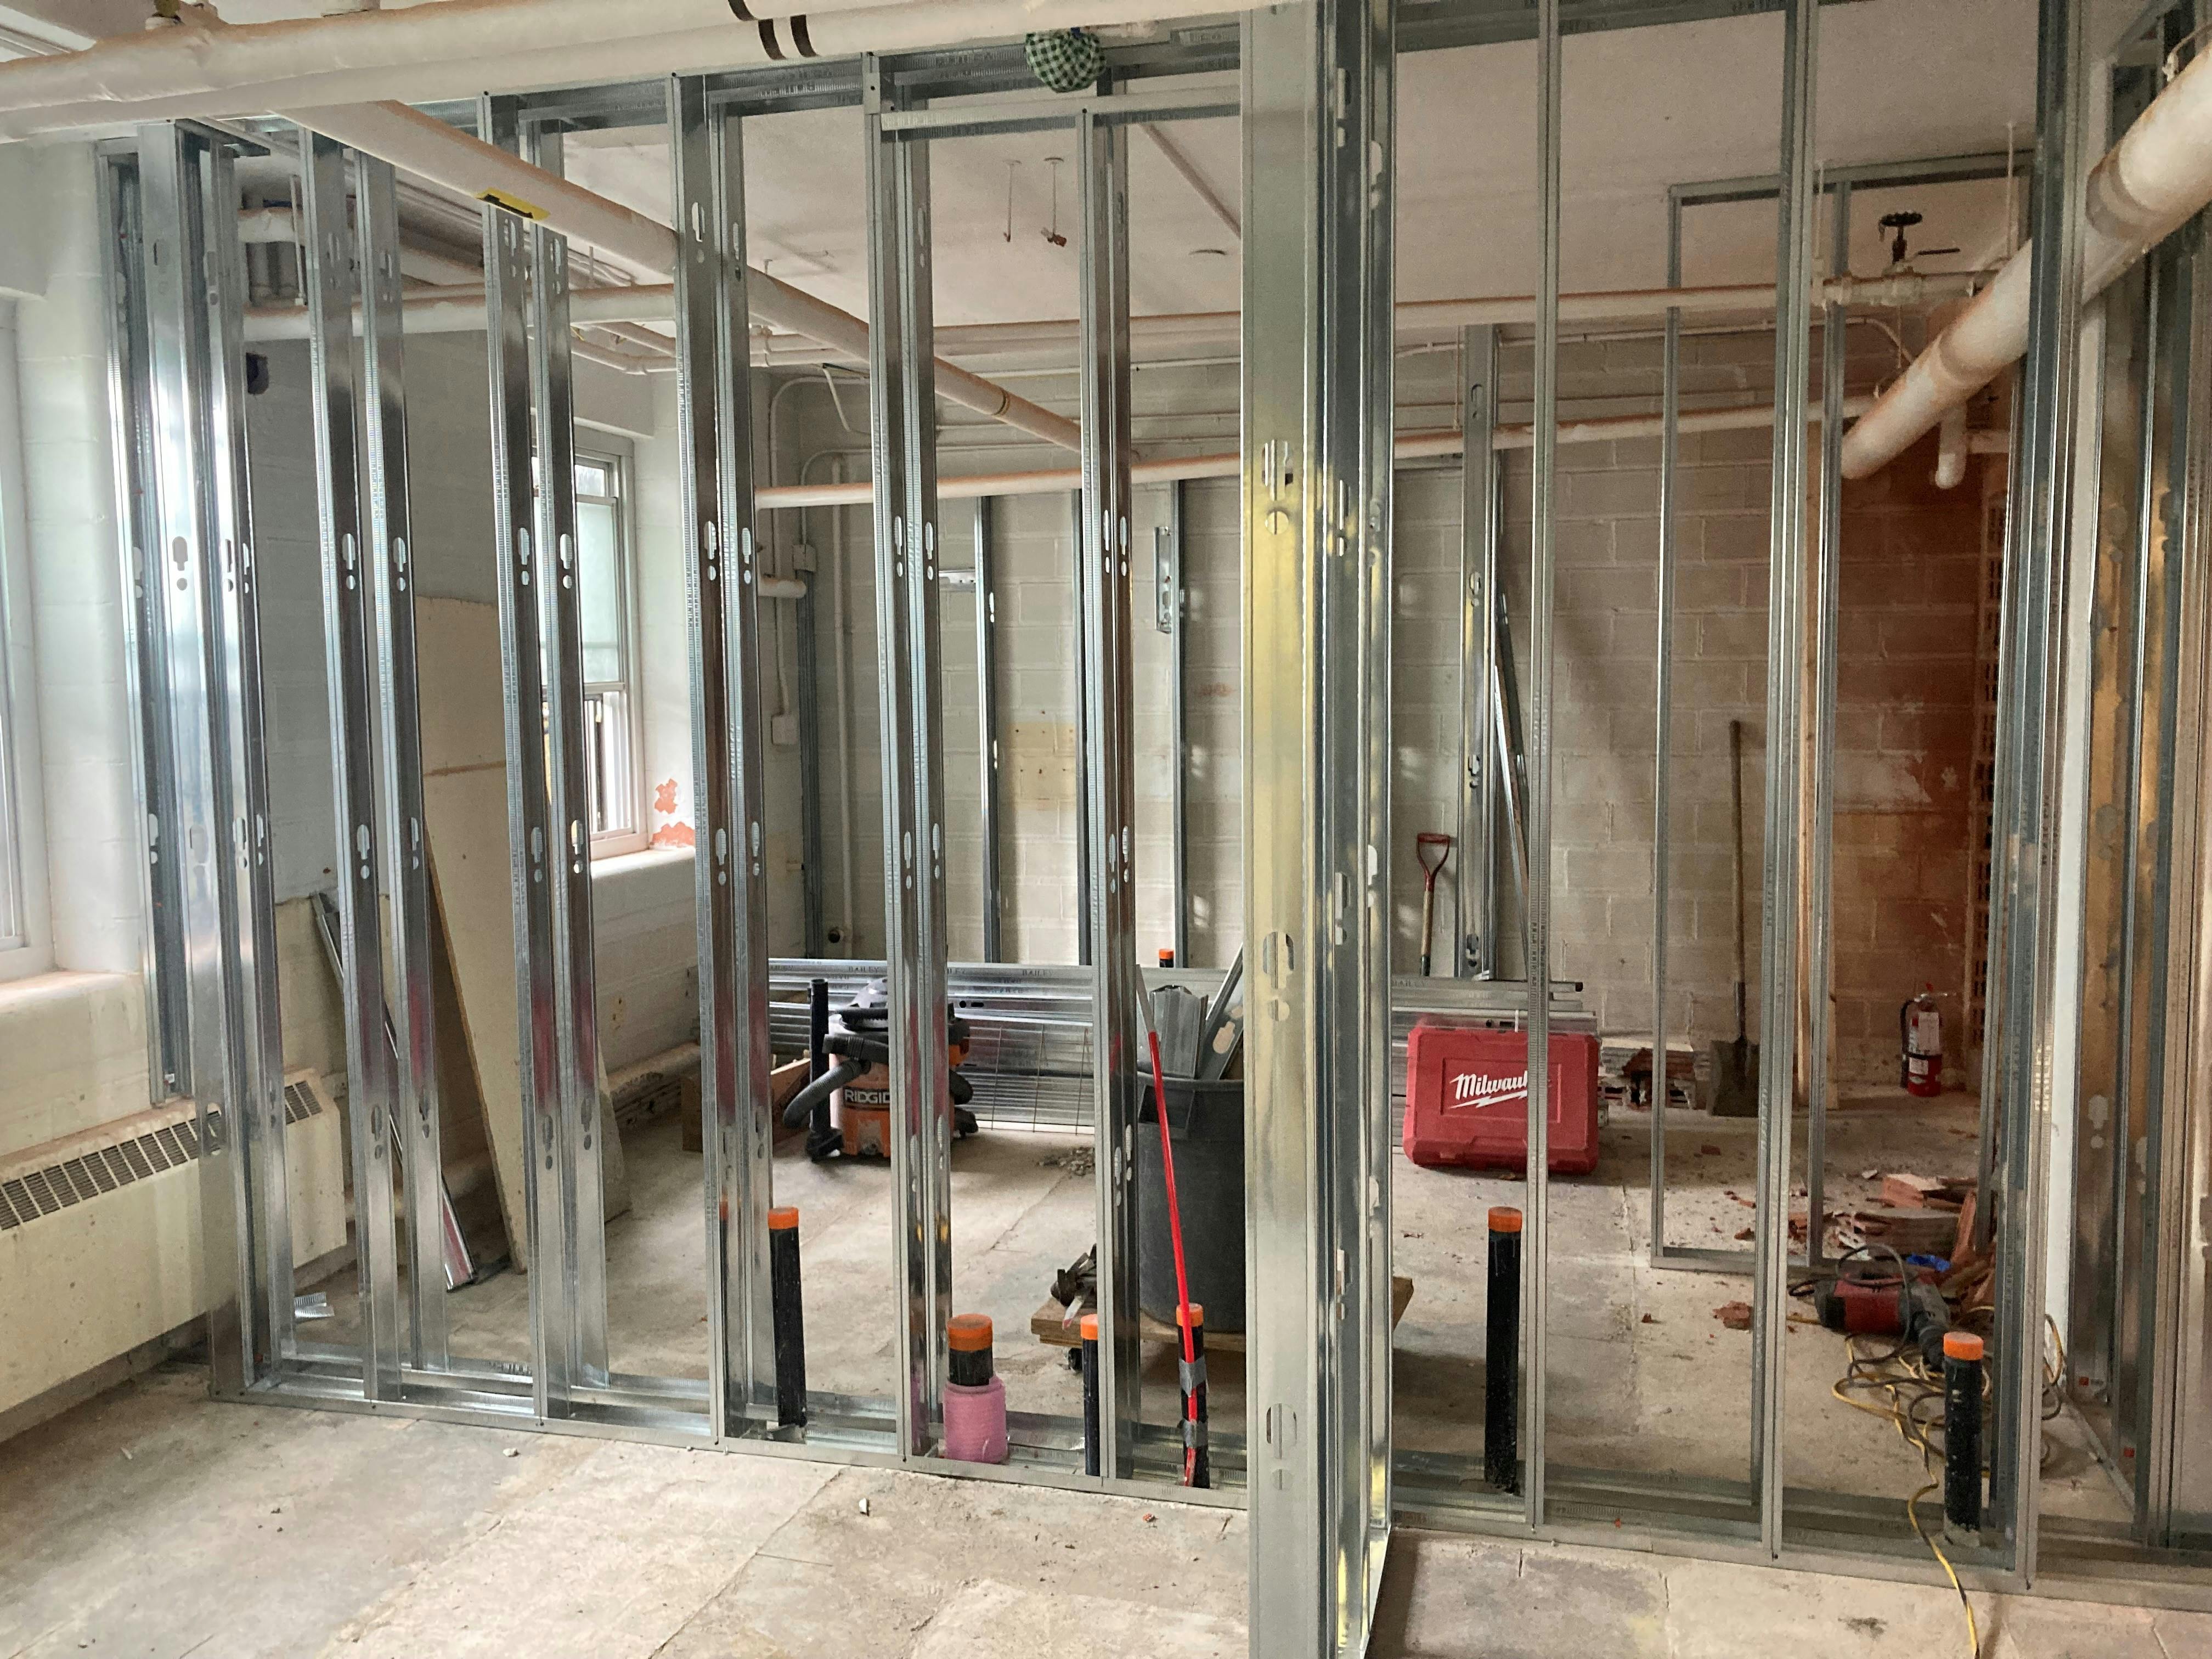 South Elevator Update - May 2022